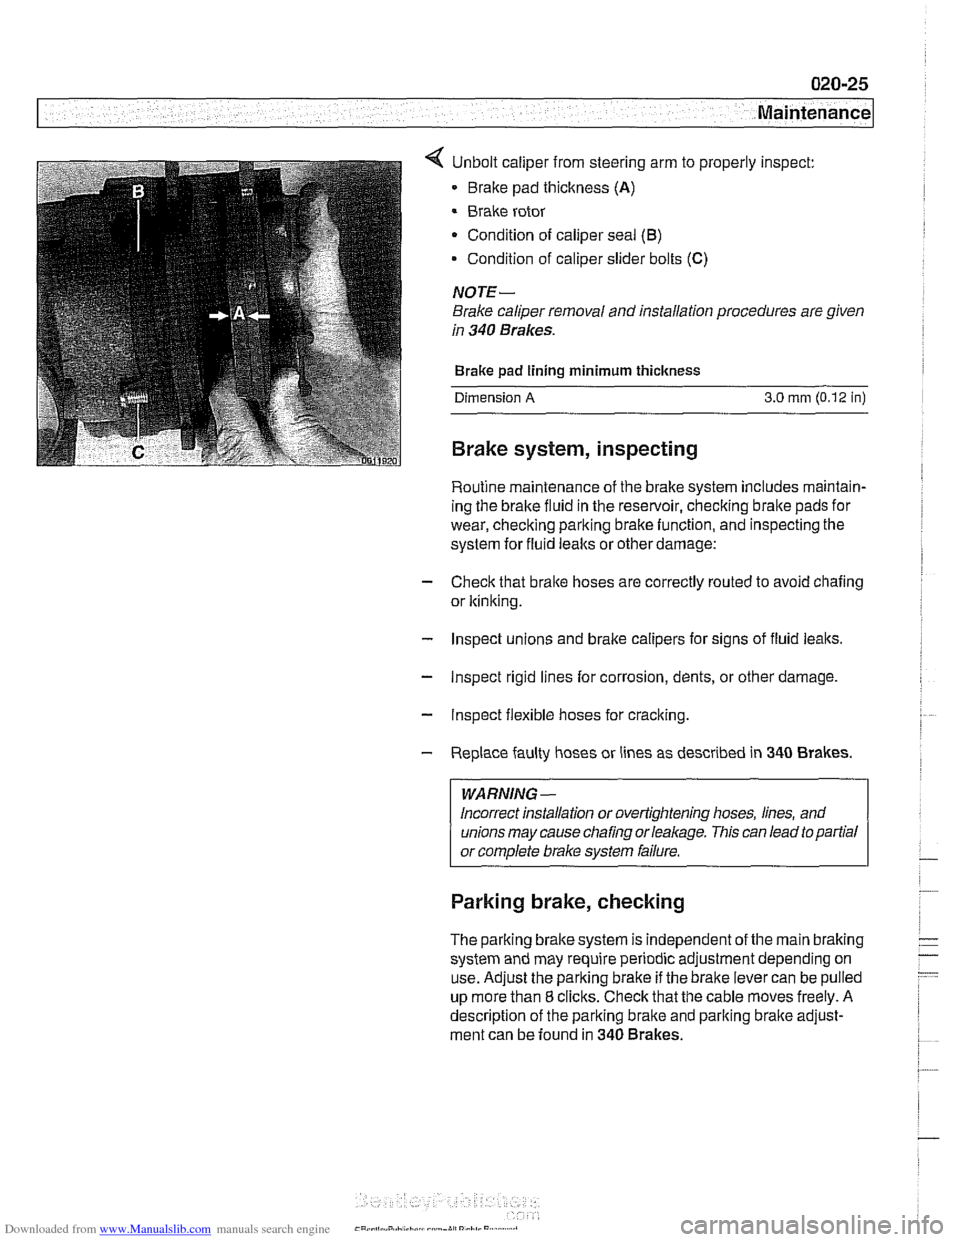 BMW 530i 1997 E39 Workshop Manual Downloaded from www.Manualslib.com manuals search engine 
7 Maintenance 
< Unbolt caliper from steering arm  to properly  inspect: 
Brake  pad thickness 
(A) 
Brake rotor 
Condition  of caliper seal 
